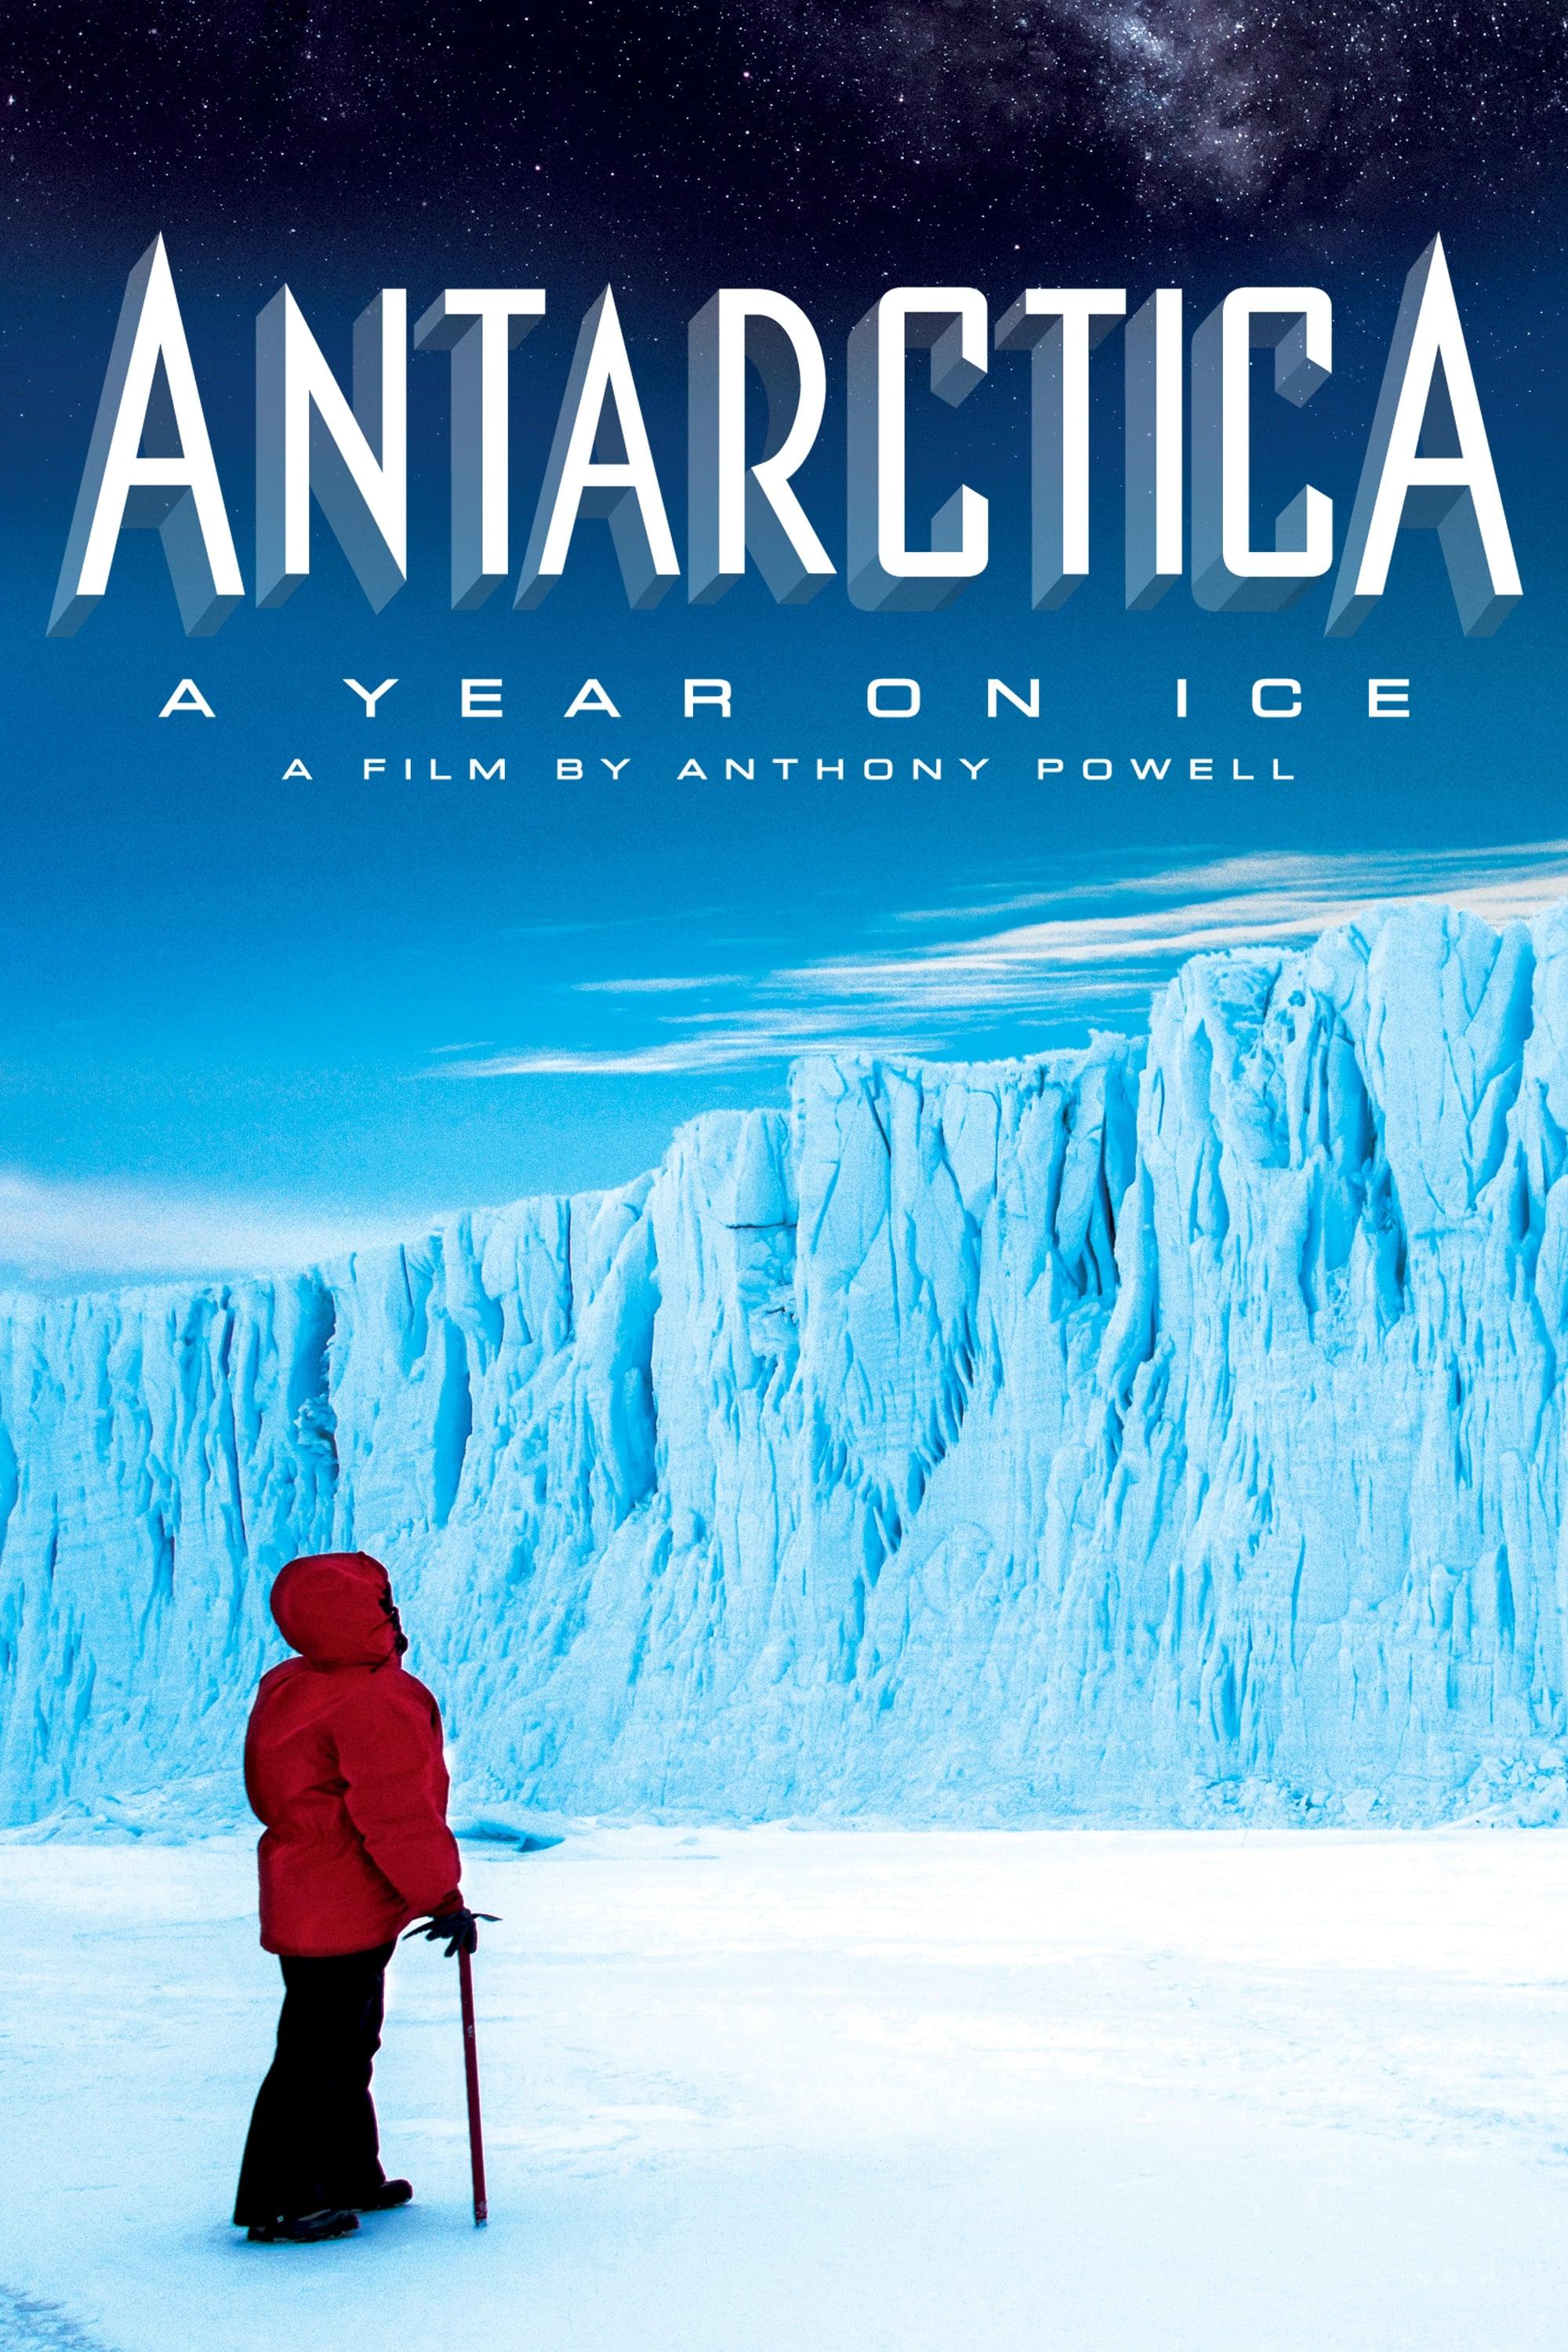 Antarctica: A Year on Ice poster